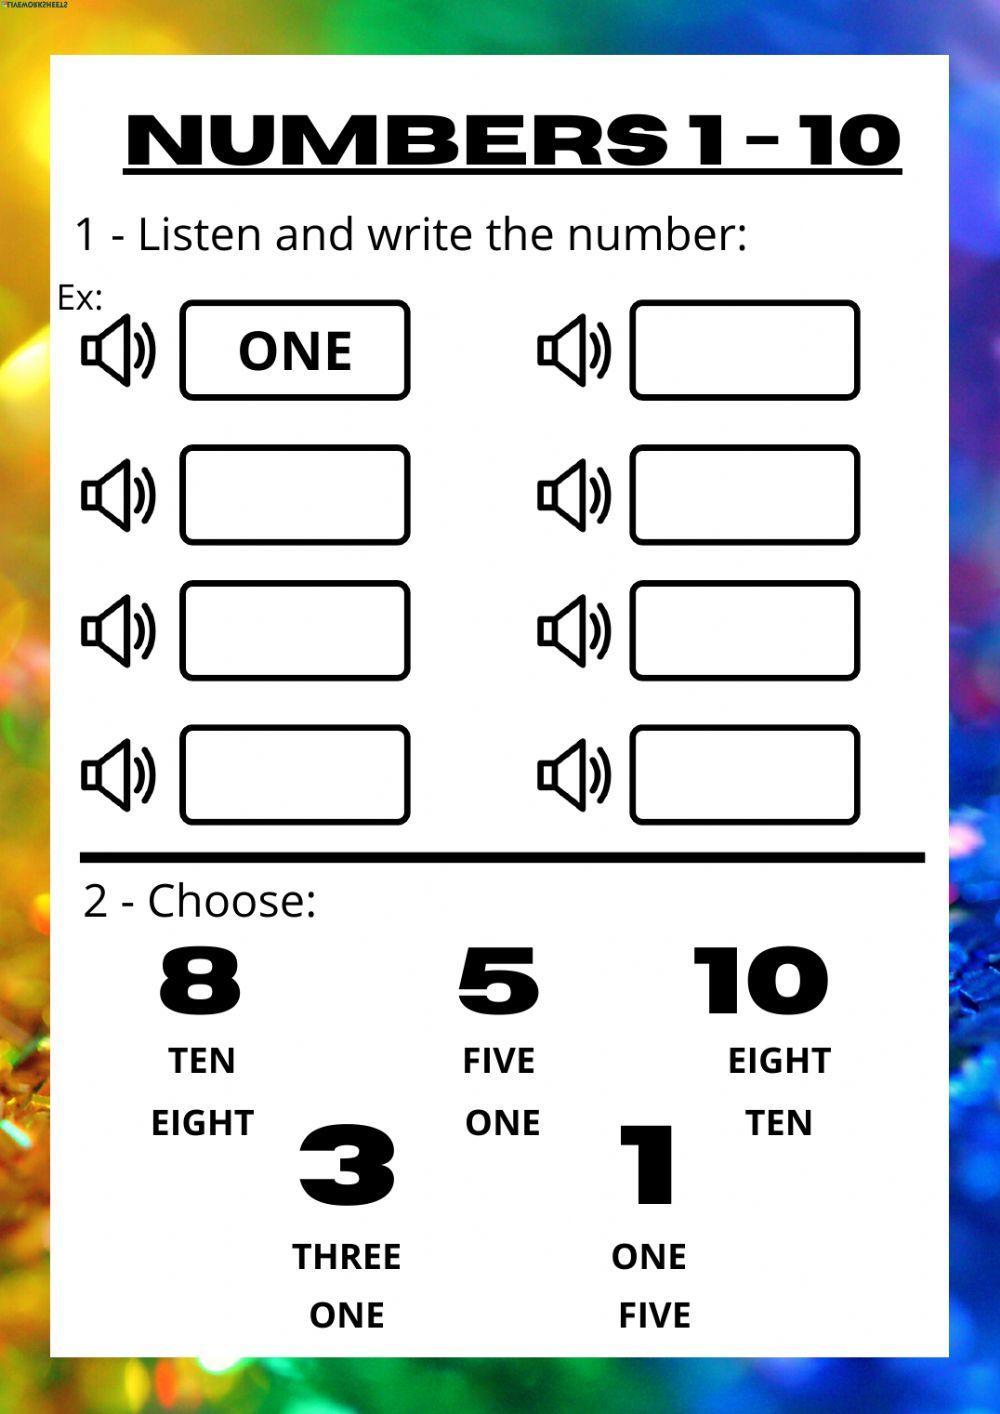 Numbers from 1 - 10